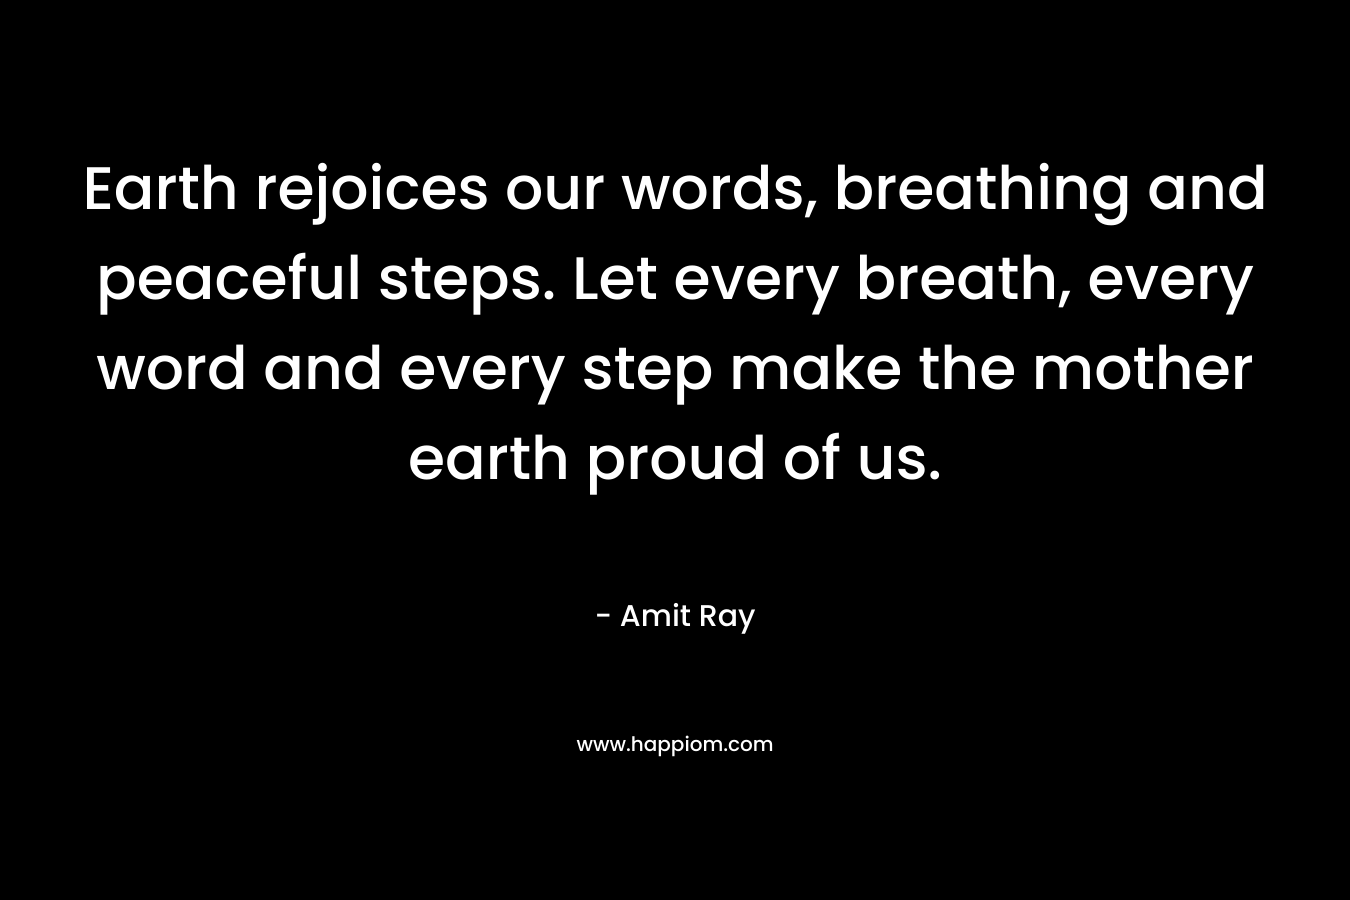 Earth rejoices our words, breathing and peaceful steps. Let every breath, every word and every step make the mother earth proud of us. – Amit Ray